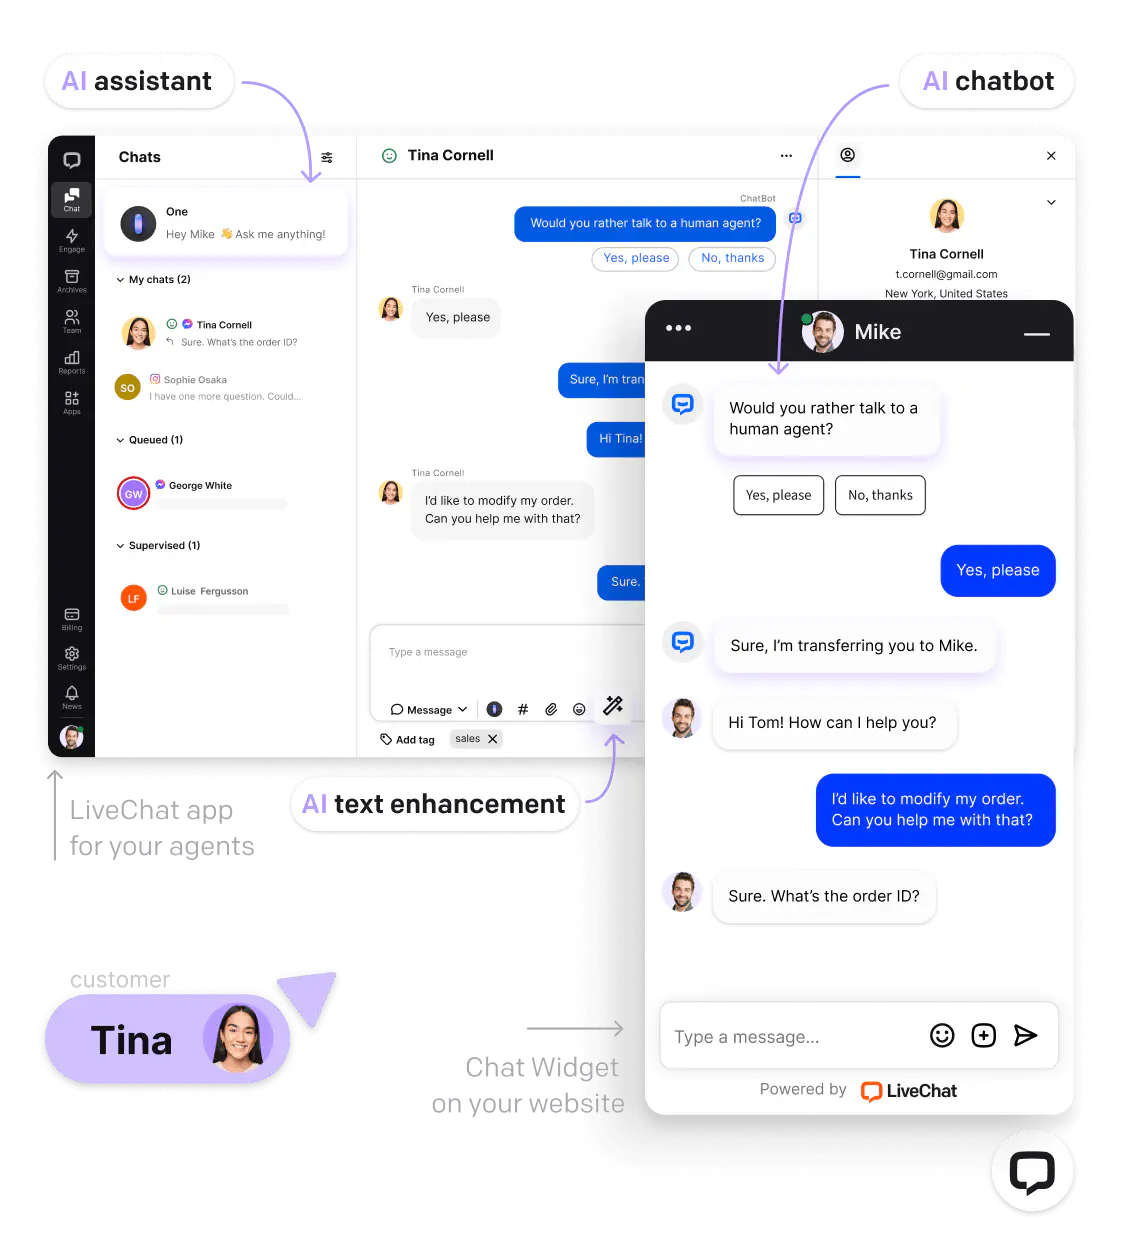 The chat tab within the Live Chat app allows access to One, an AI assistant that enhances work effectiveness, and to chats with customers handled by AI chatbots.